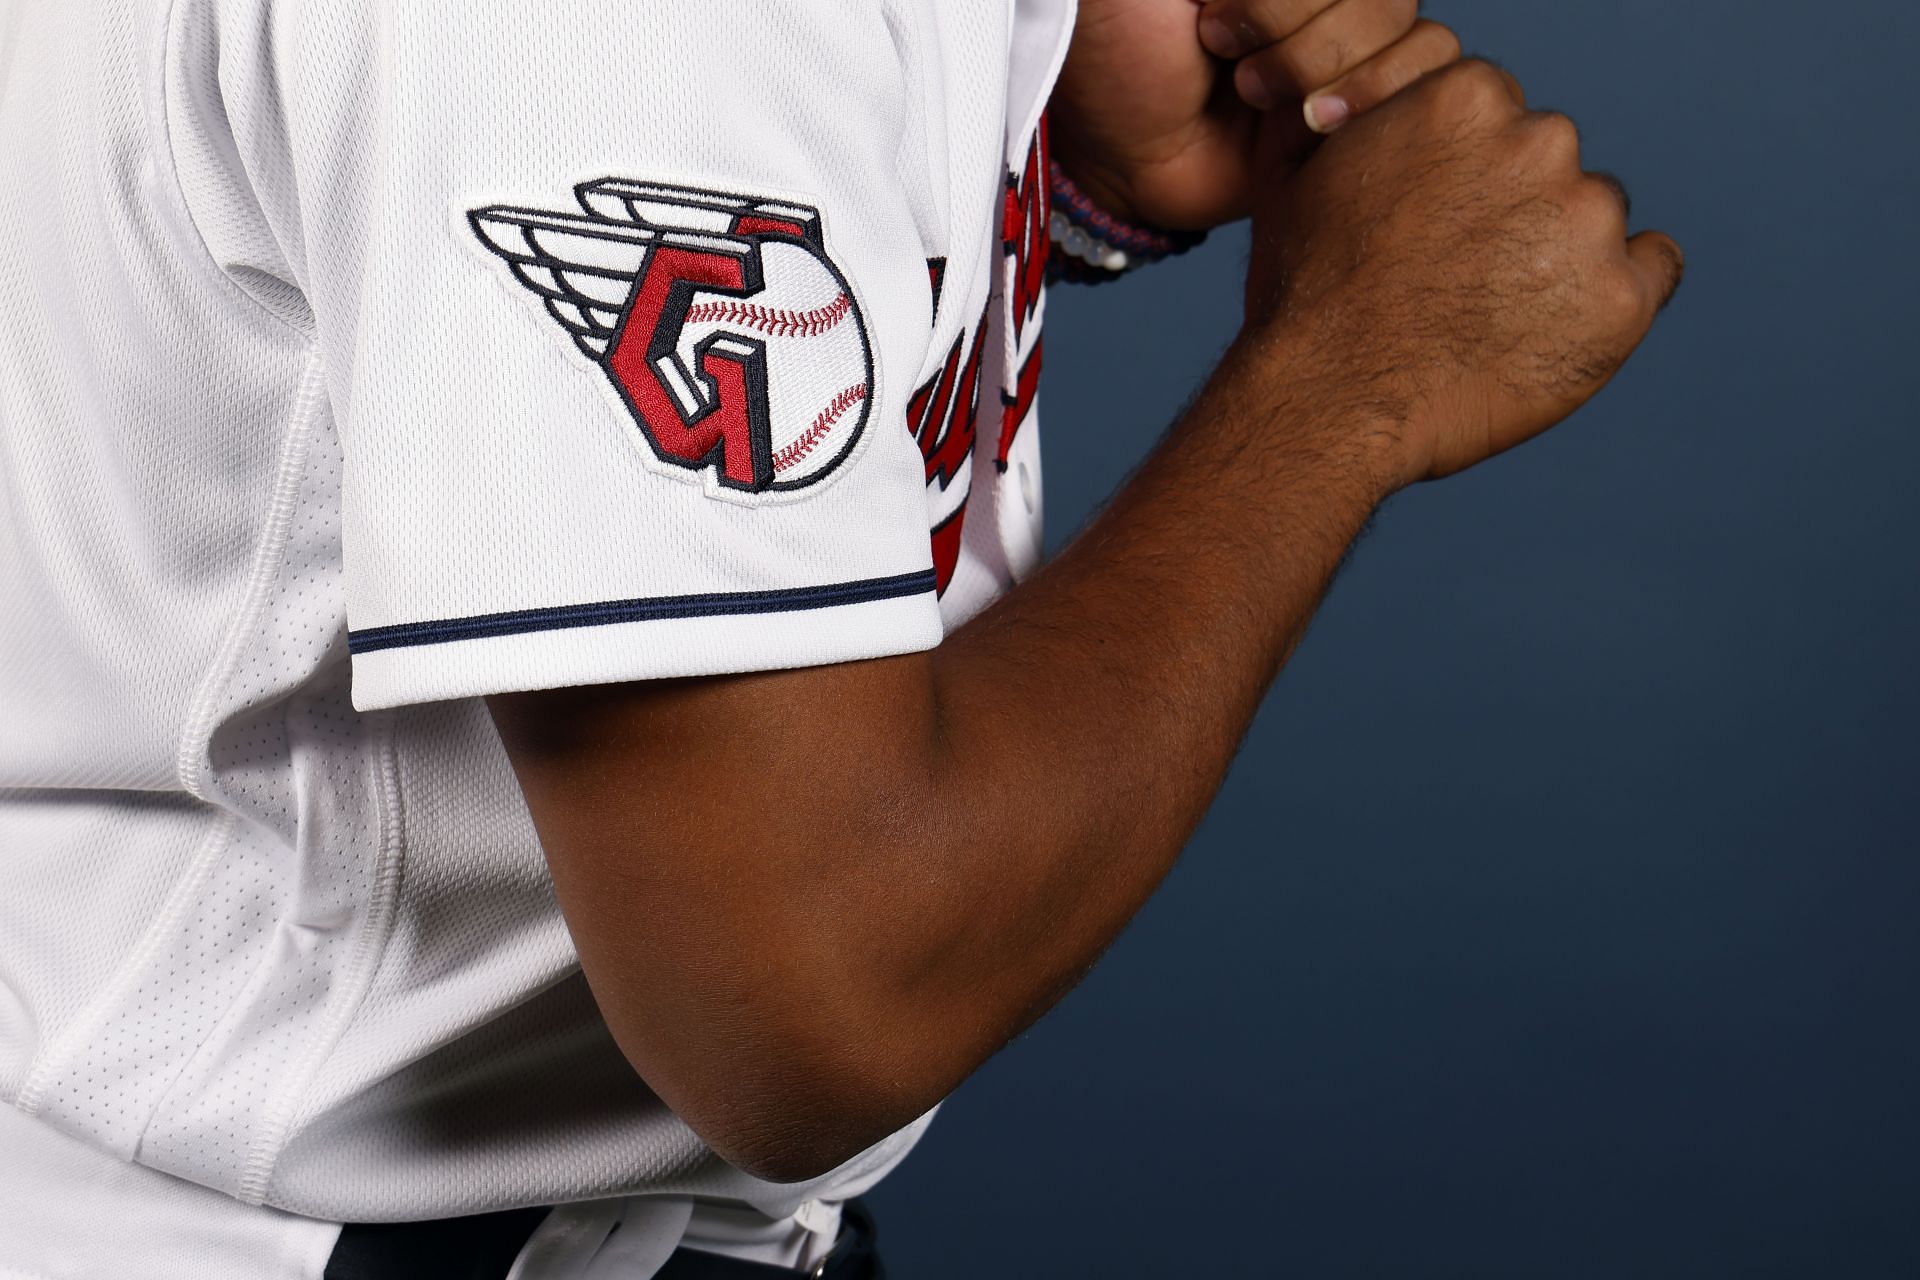 GOODYEAR, ARIZONA - MARCH 22: A detailed view of the logo on the jersey worn by Jose Tena #75 of the Cleveland Guardians poses during Photo Day at Goodyear Ballpark on March 22, 2022, in Goodyear, Arizona. (Photo by Chris Coduto/Getty Images)